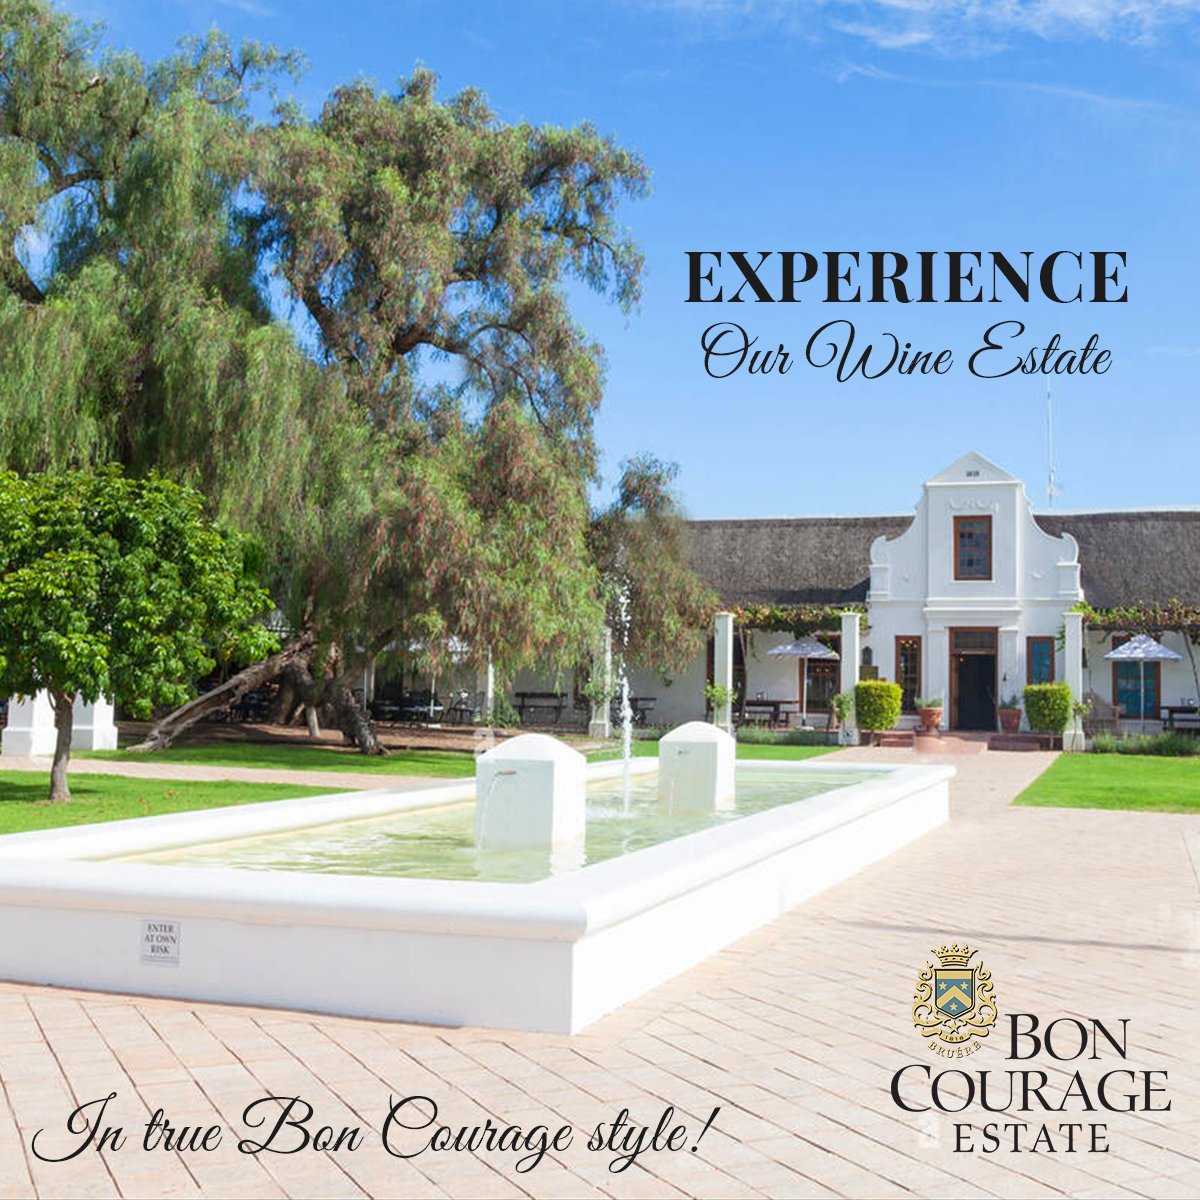 When last did you pay us a visit? 😉 Enjoy our breathtaking views & taste our award winning wines. 🏅🍷 We look forward to welcoming you!🍾 #BonCourage #exceptionalquality #awardwinningwine #VisitUs #Winetasting #Food&Wine #RobertsonWine